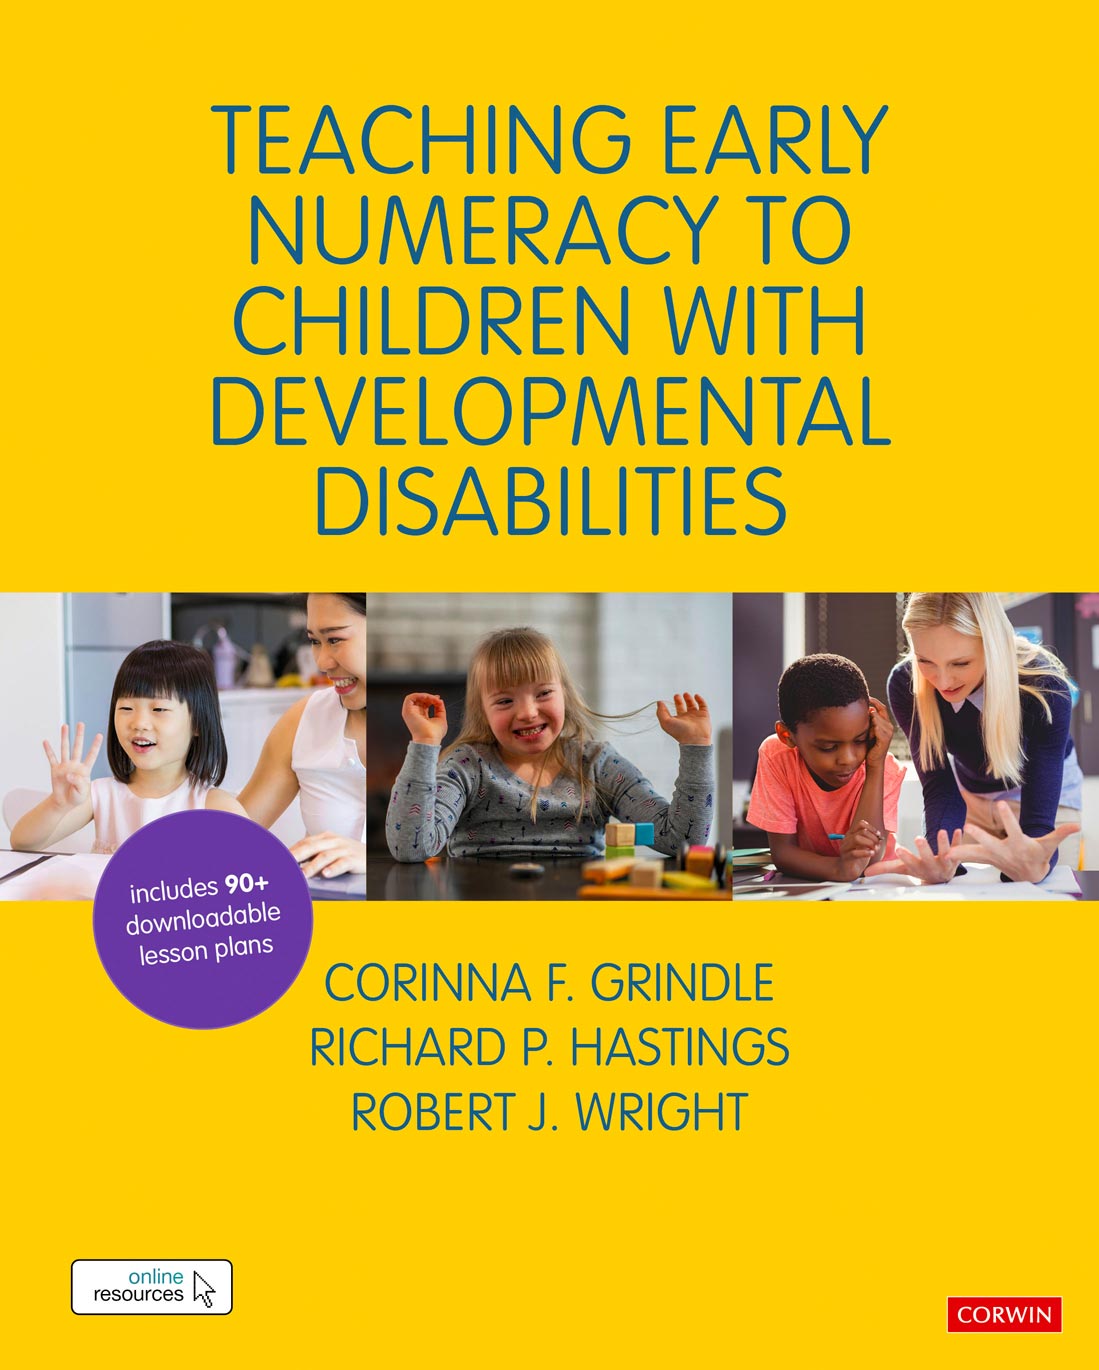   Teaching Early Numeracy to Children with Developmental Disabilities